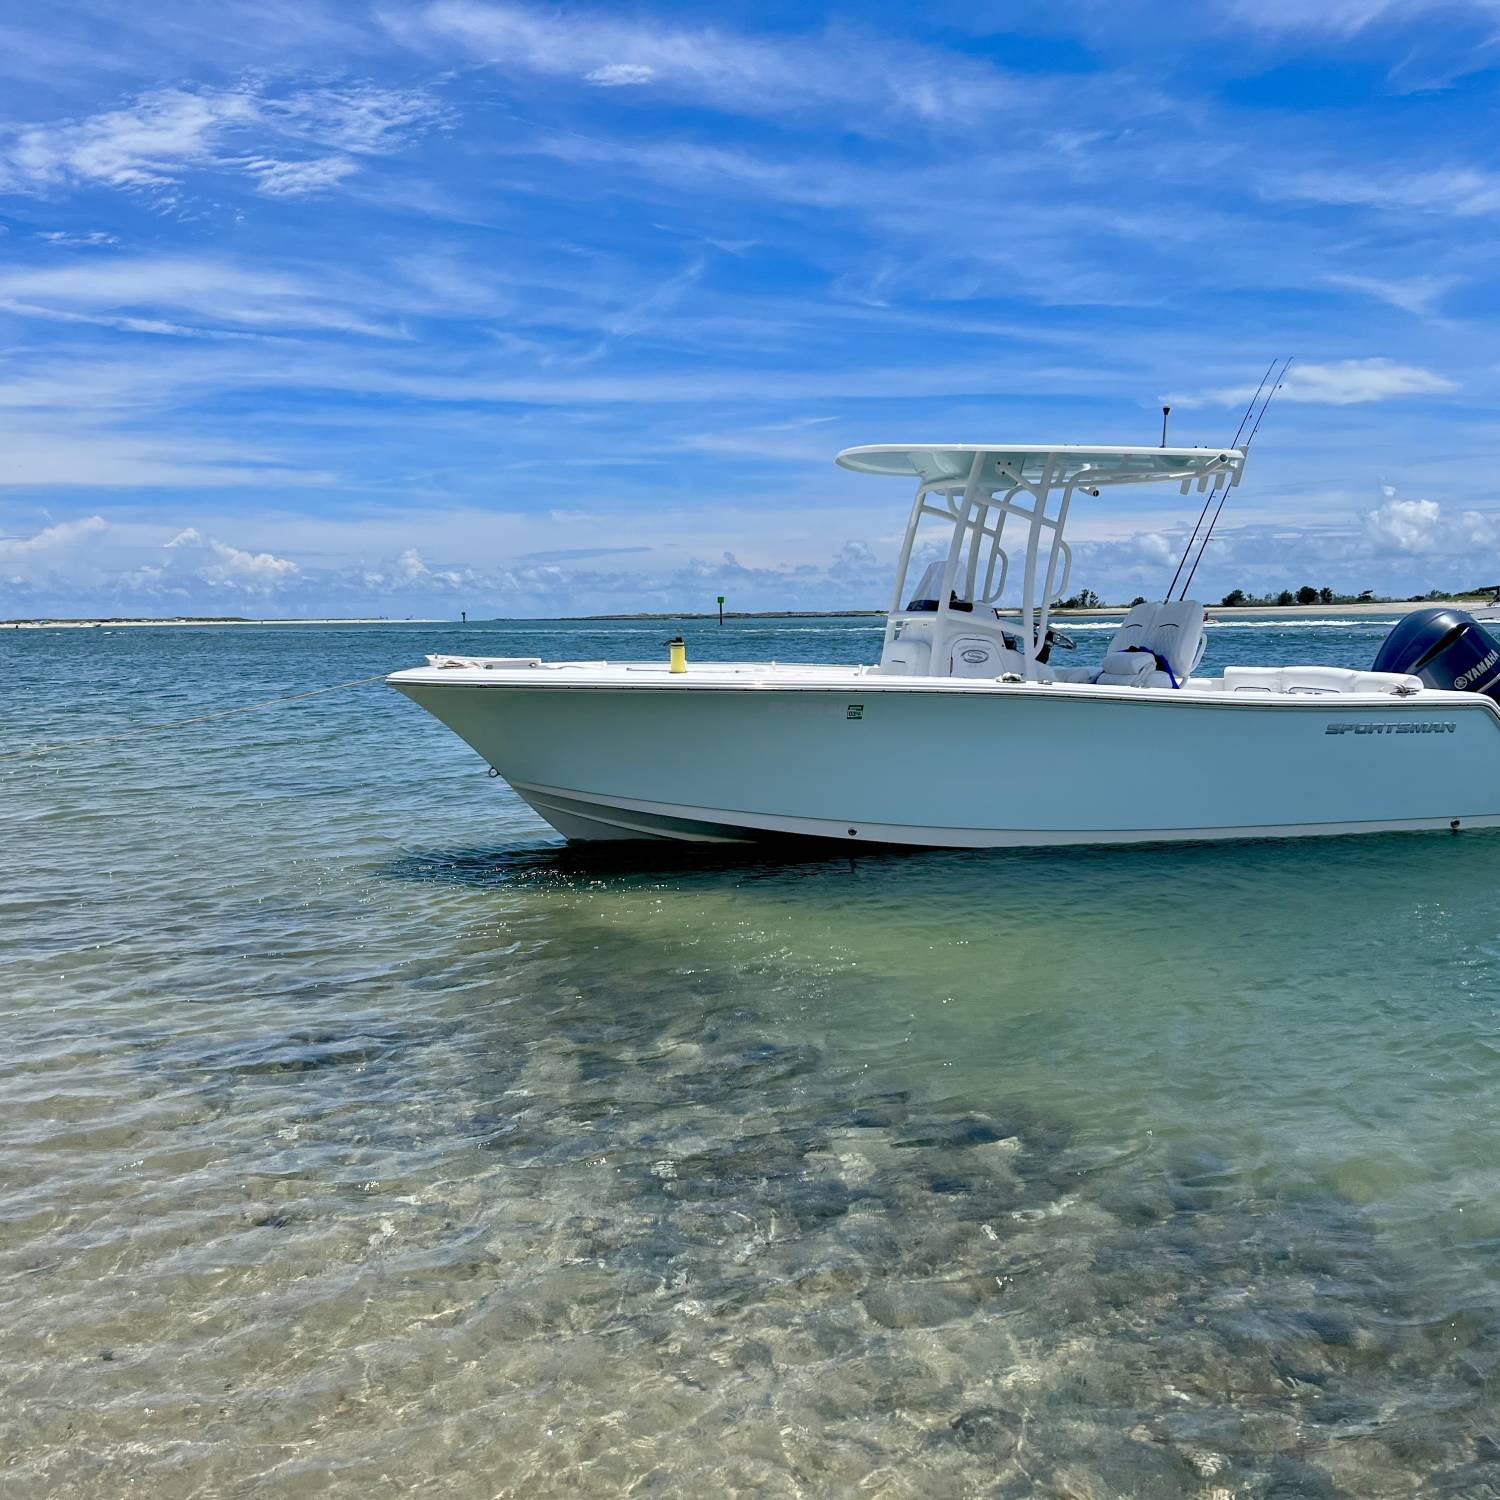 Title: 23 - On board their Sportsman Heritage 231 Center Console - Location: Masonboro inlet, Wrightsville beach. Participating in the Photo Contest #SportsmanJuly